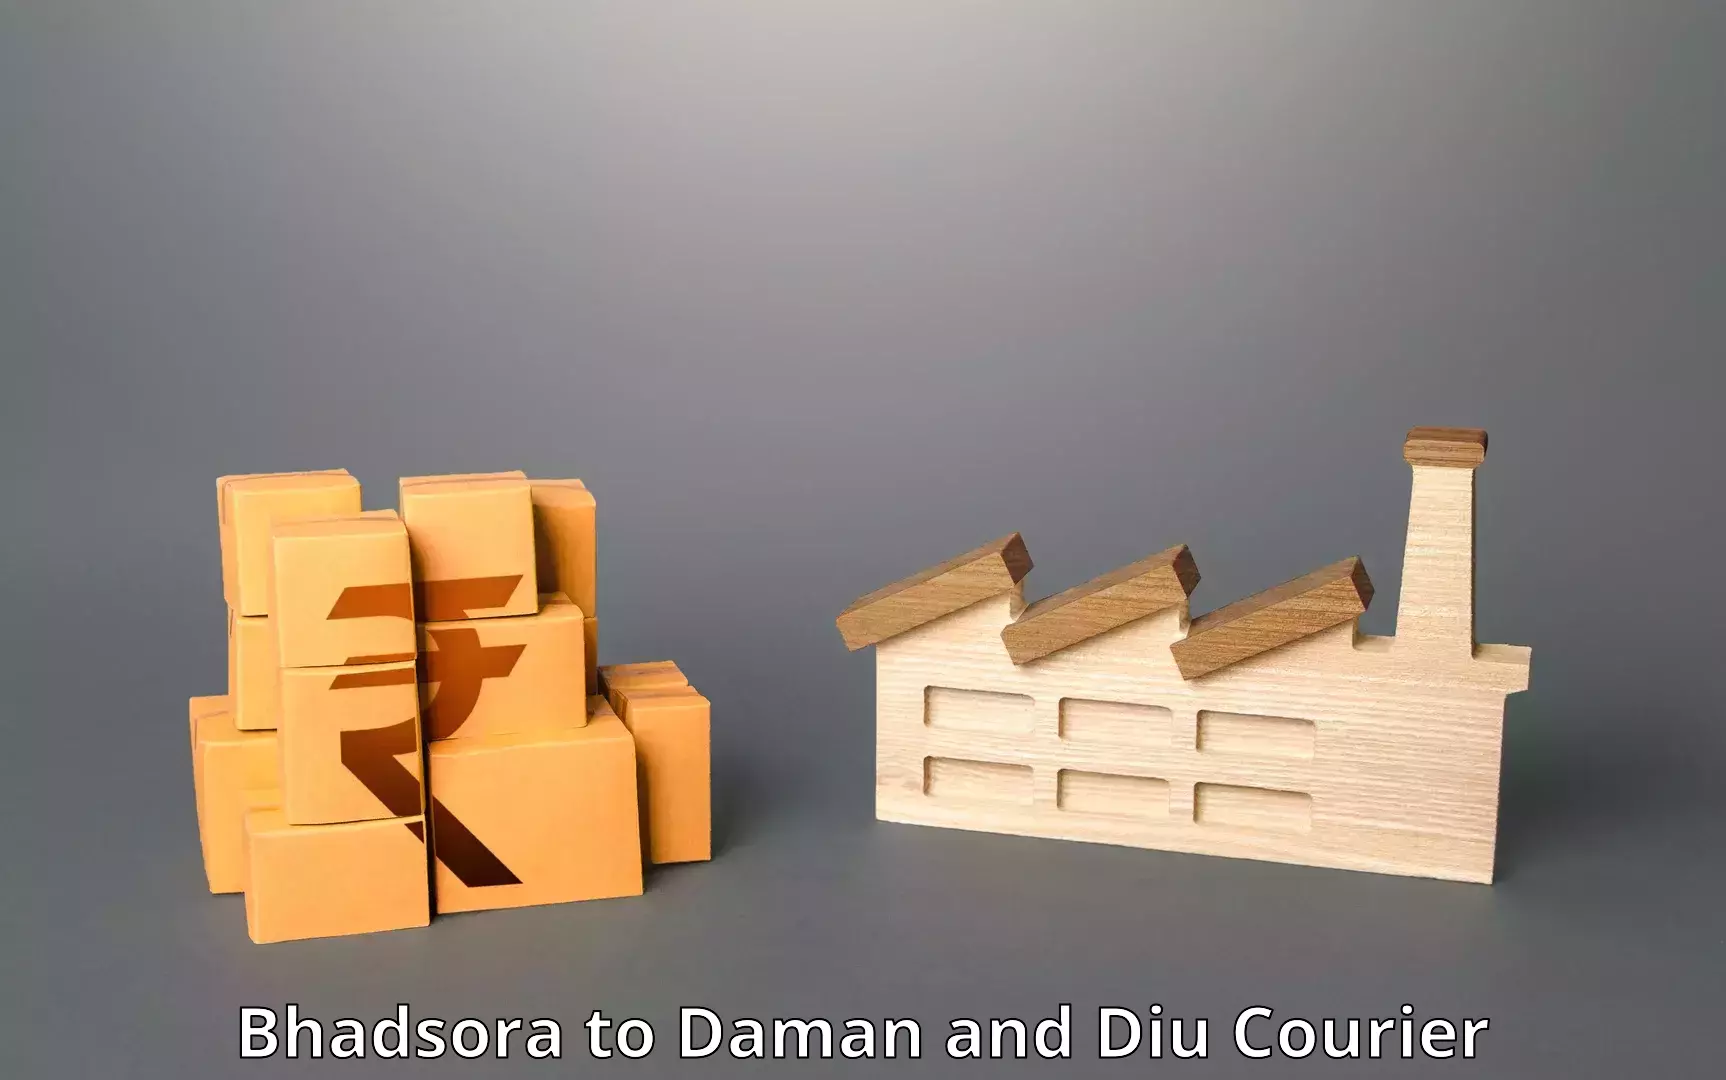 Fast-track shipping solutions Bhadsora to Daman and Diu